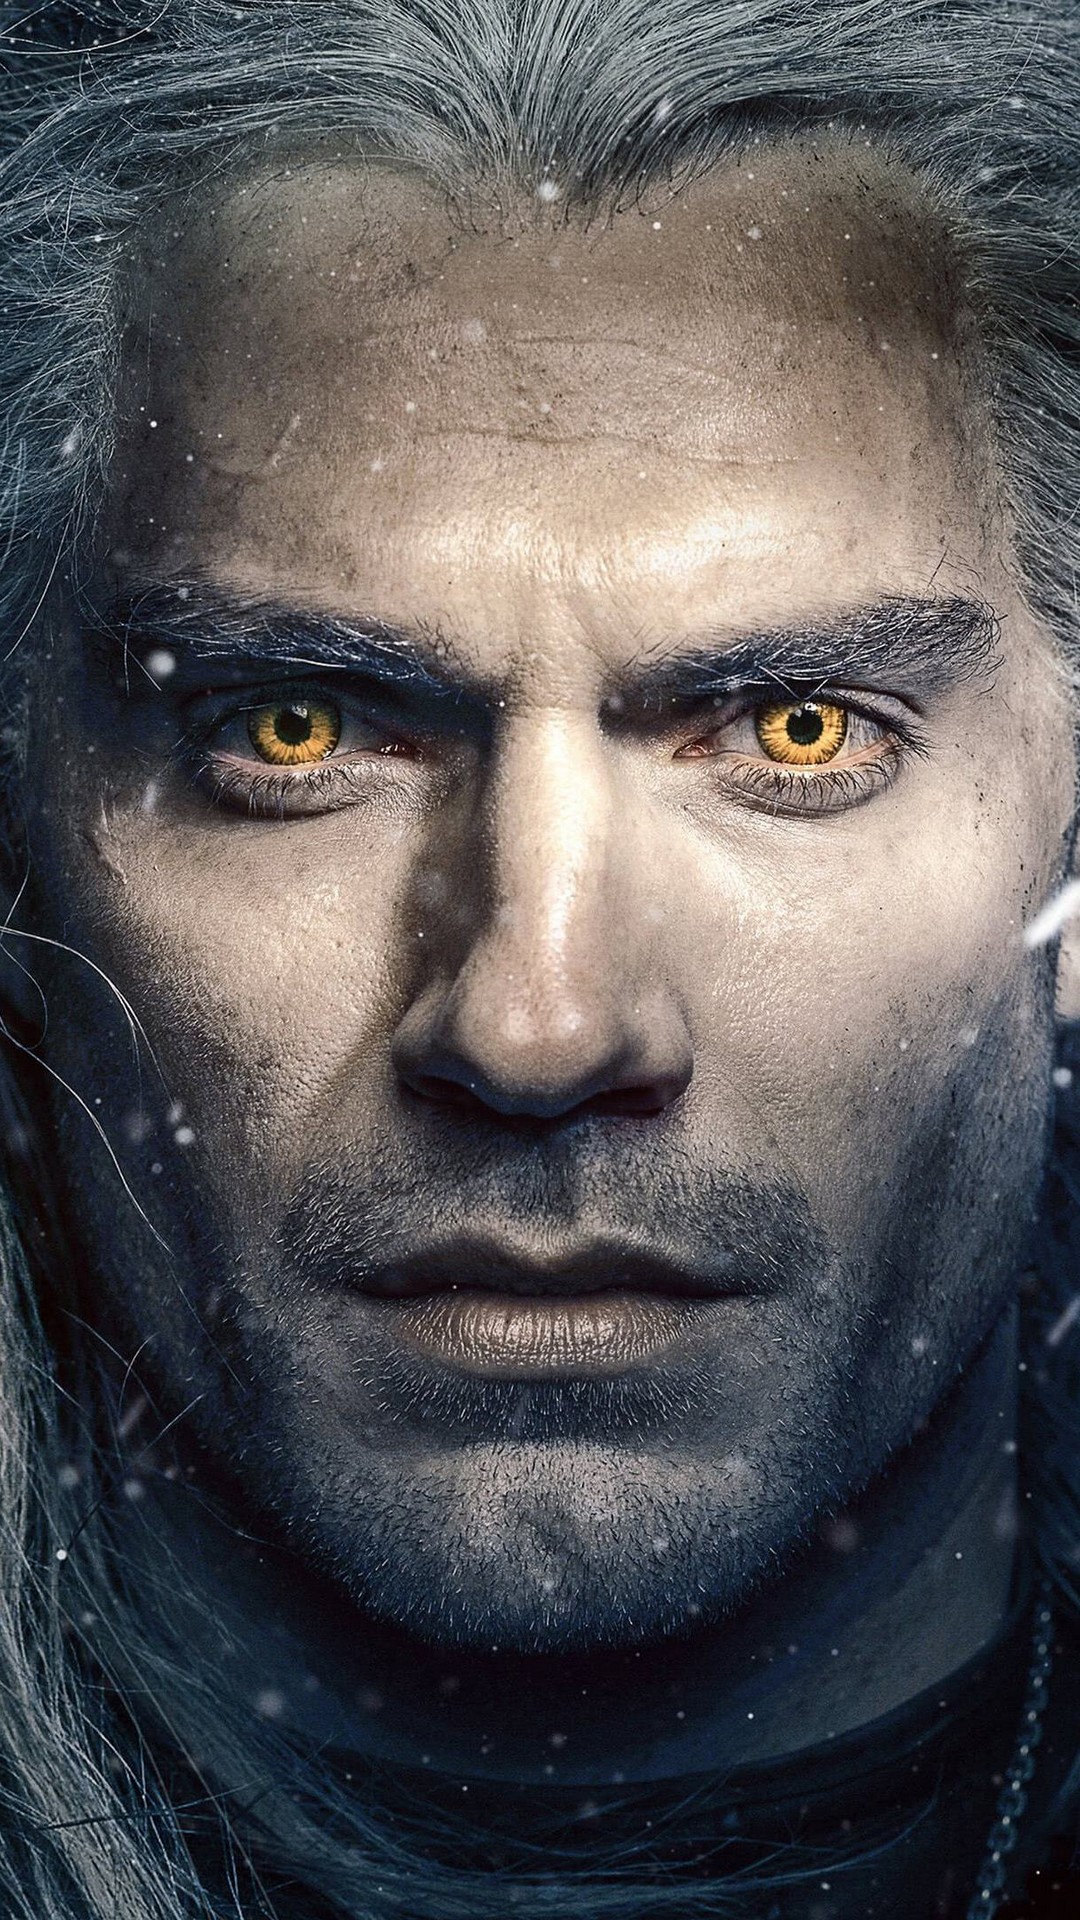 Wallpaper The Witcher for iPhone With high-resolution 1080X1920 pixel. You can use this wallpaper for your iPhone 5, 6, 7, 8, X, XS, XR backgrounds, Mobile Screensaver, or iPad Lock Screen